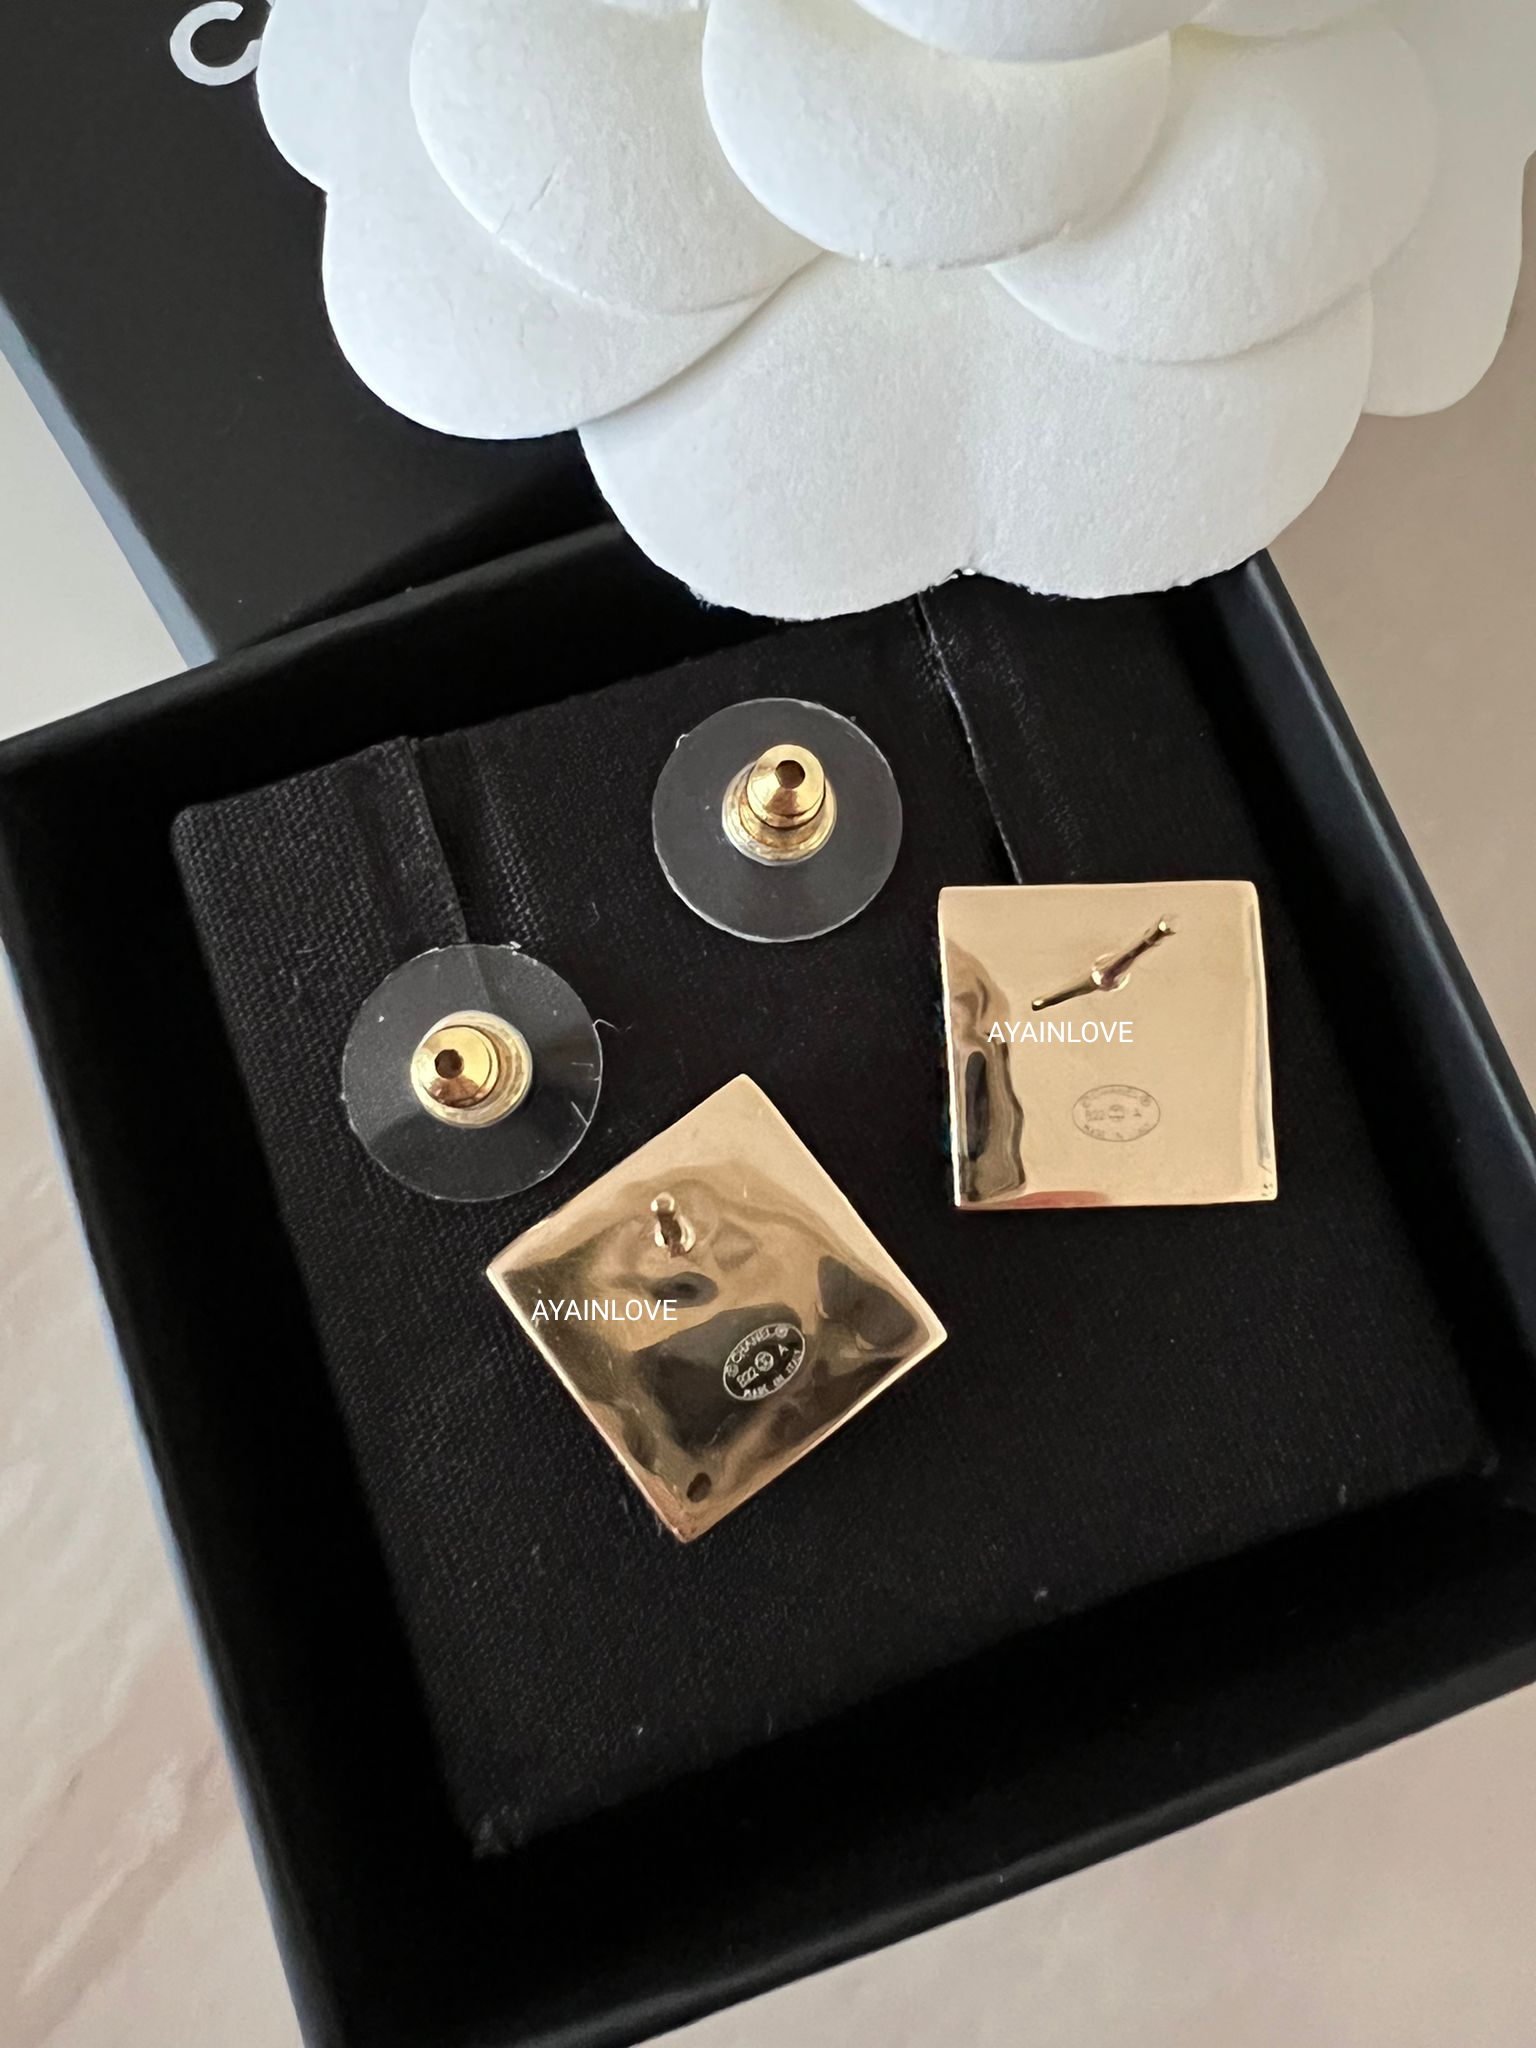 CHANEL 22A Square Black CC Stud Earrings Gold Hardware – AYAINLOVE